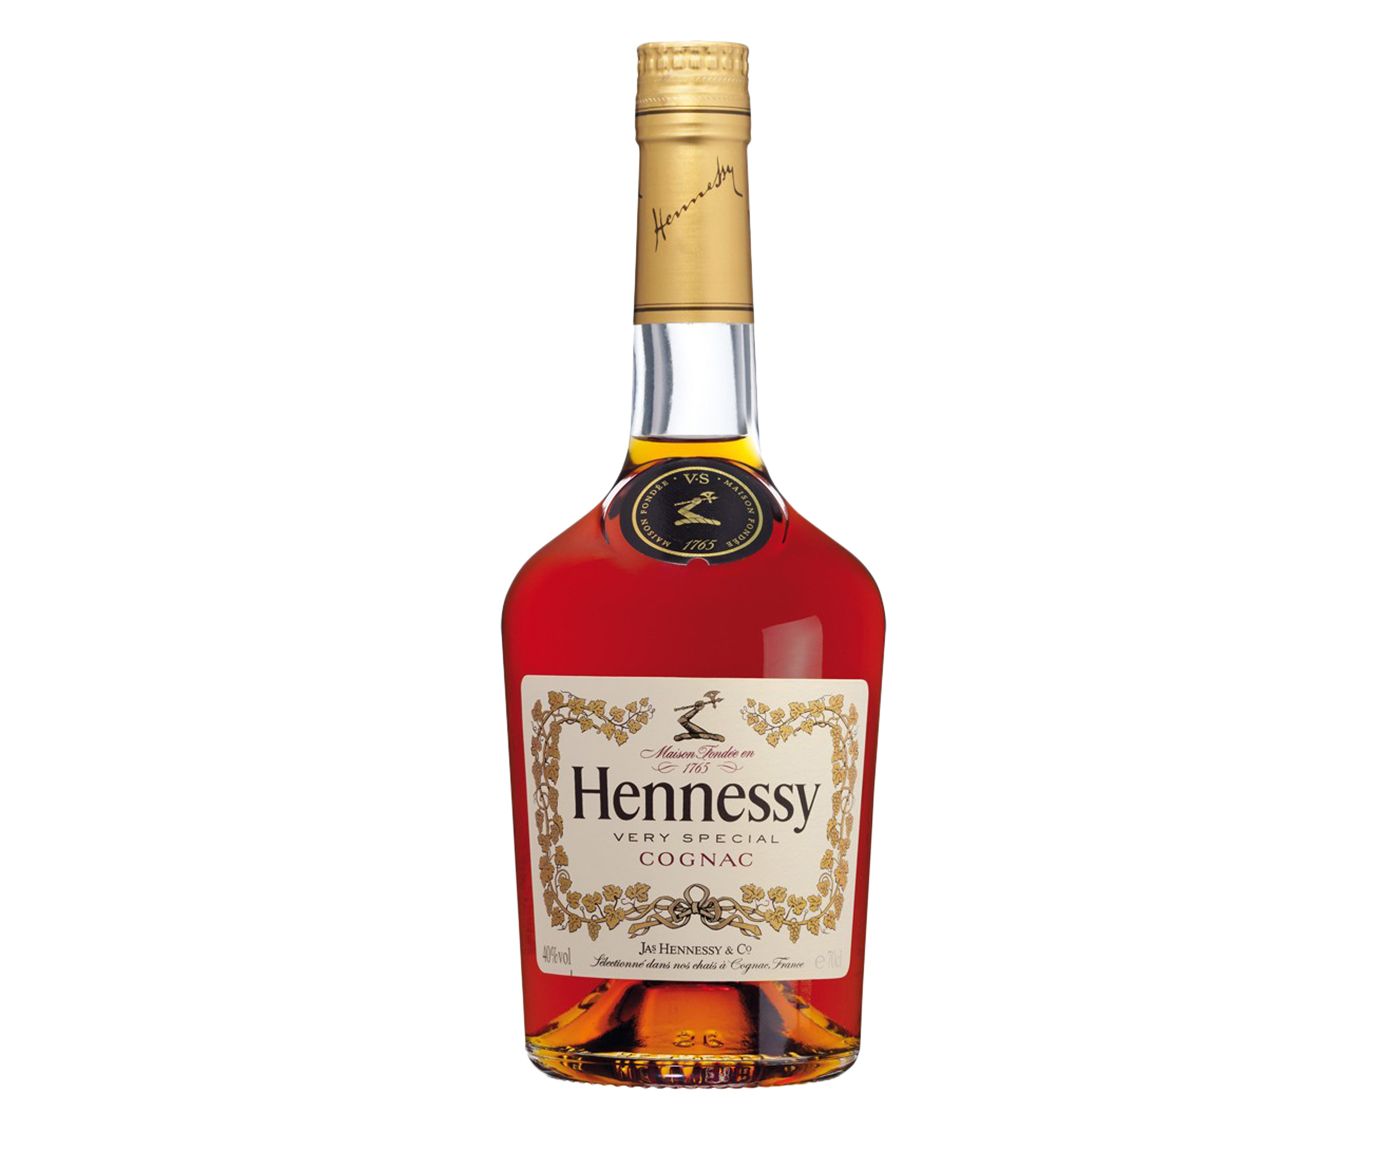 Cognac Hennessy Very Special 700ml Br